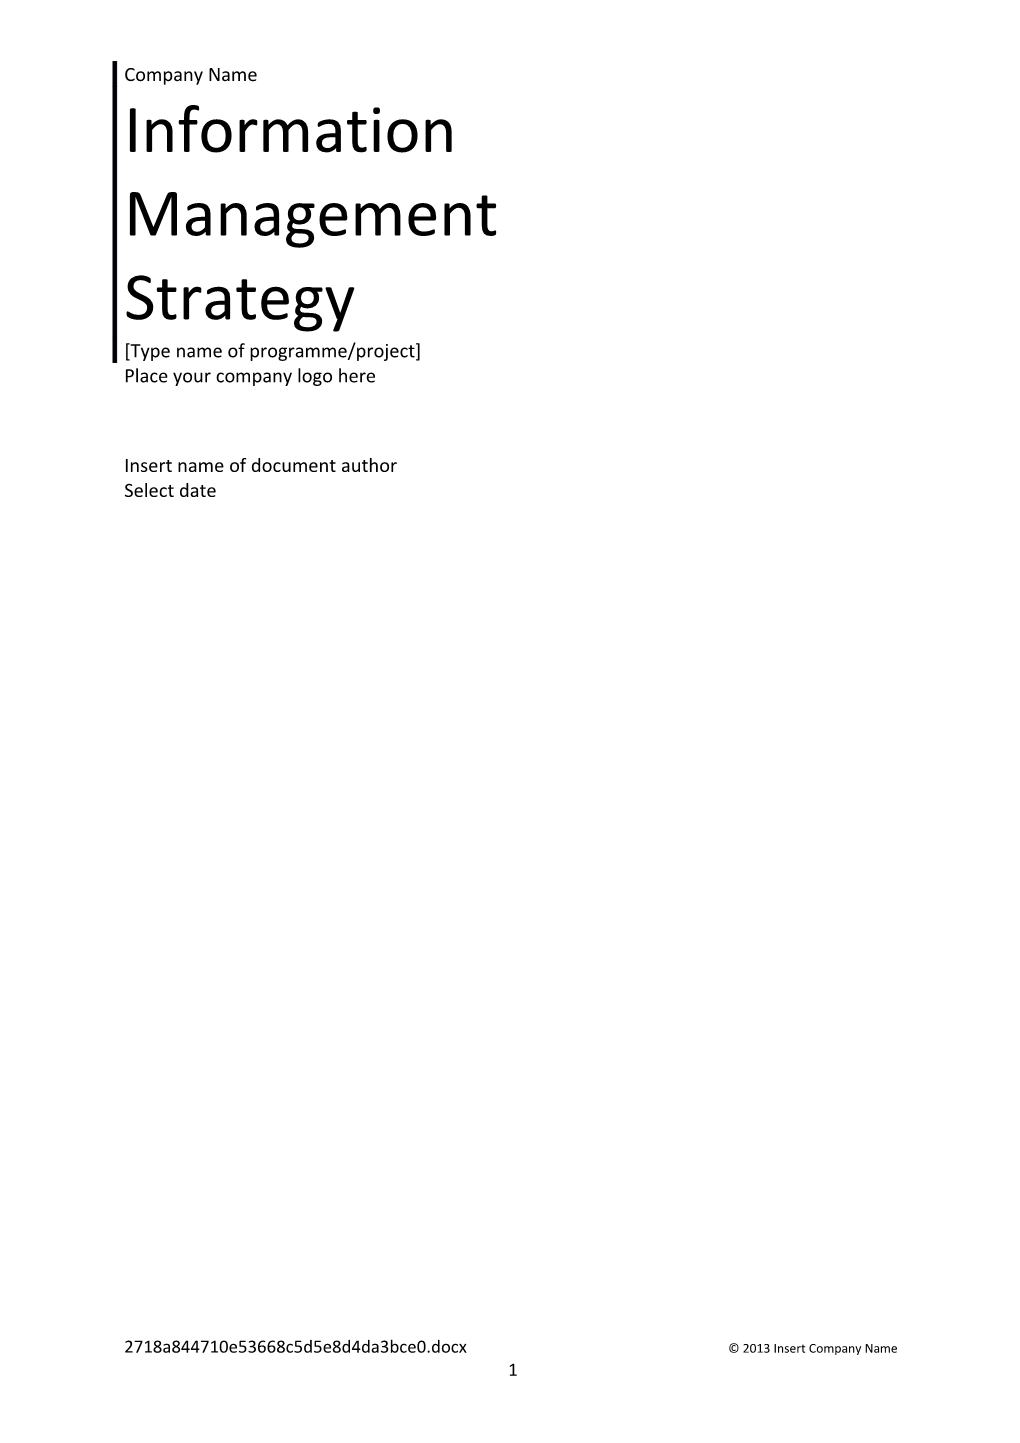 Information Management Strategy